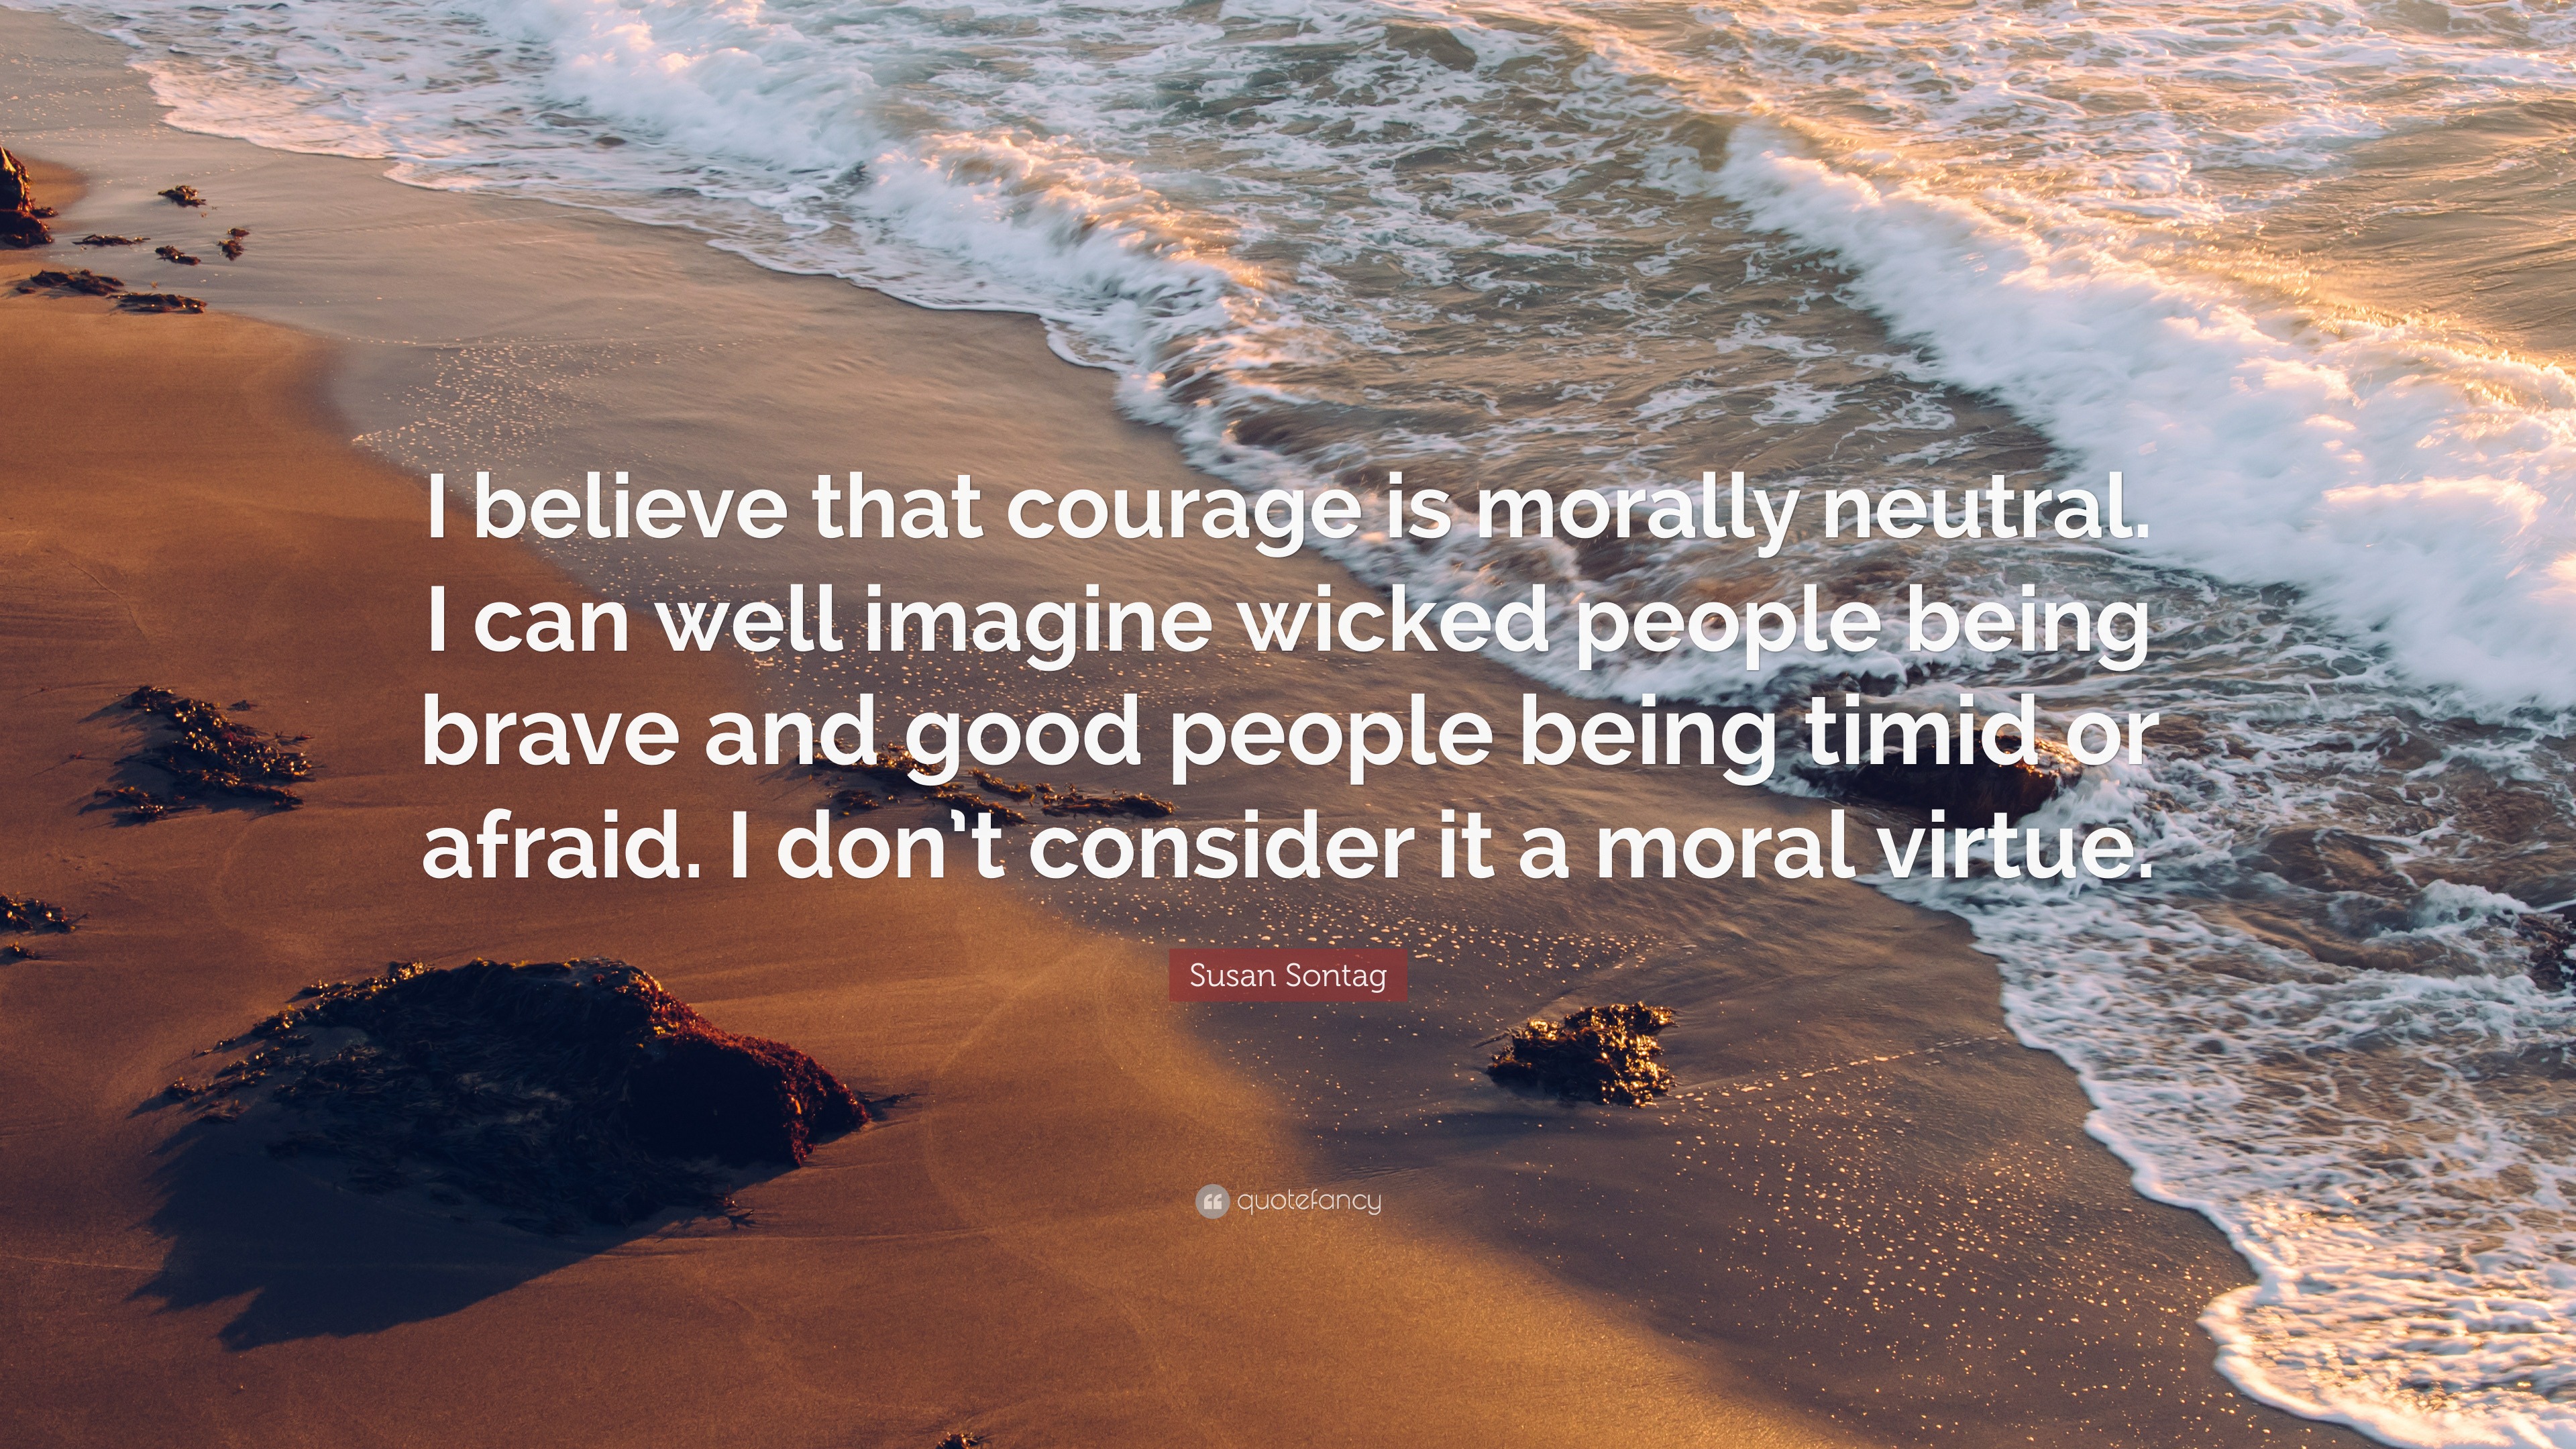 Moral Courage and Proof of It